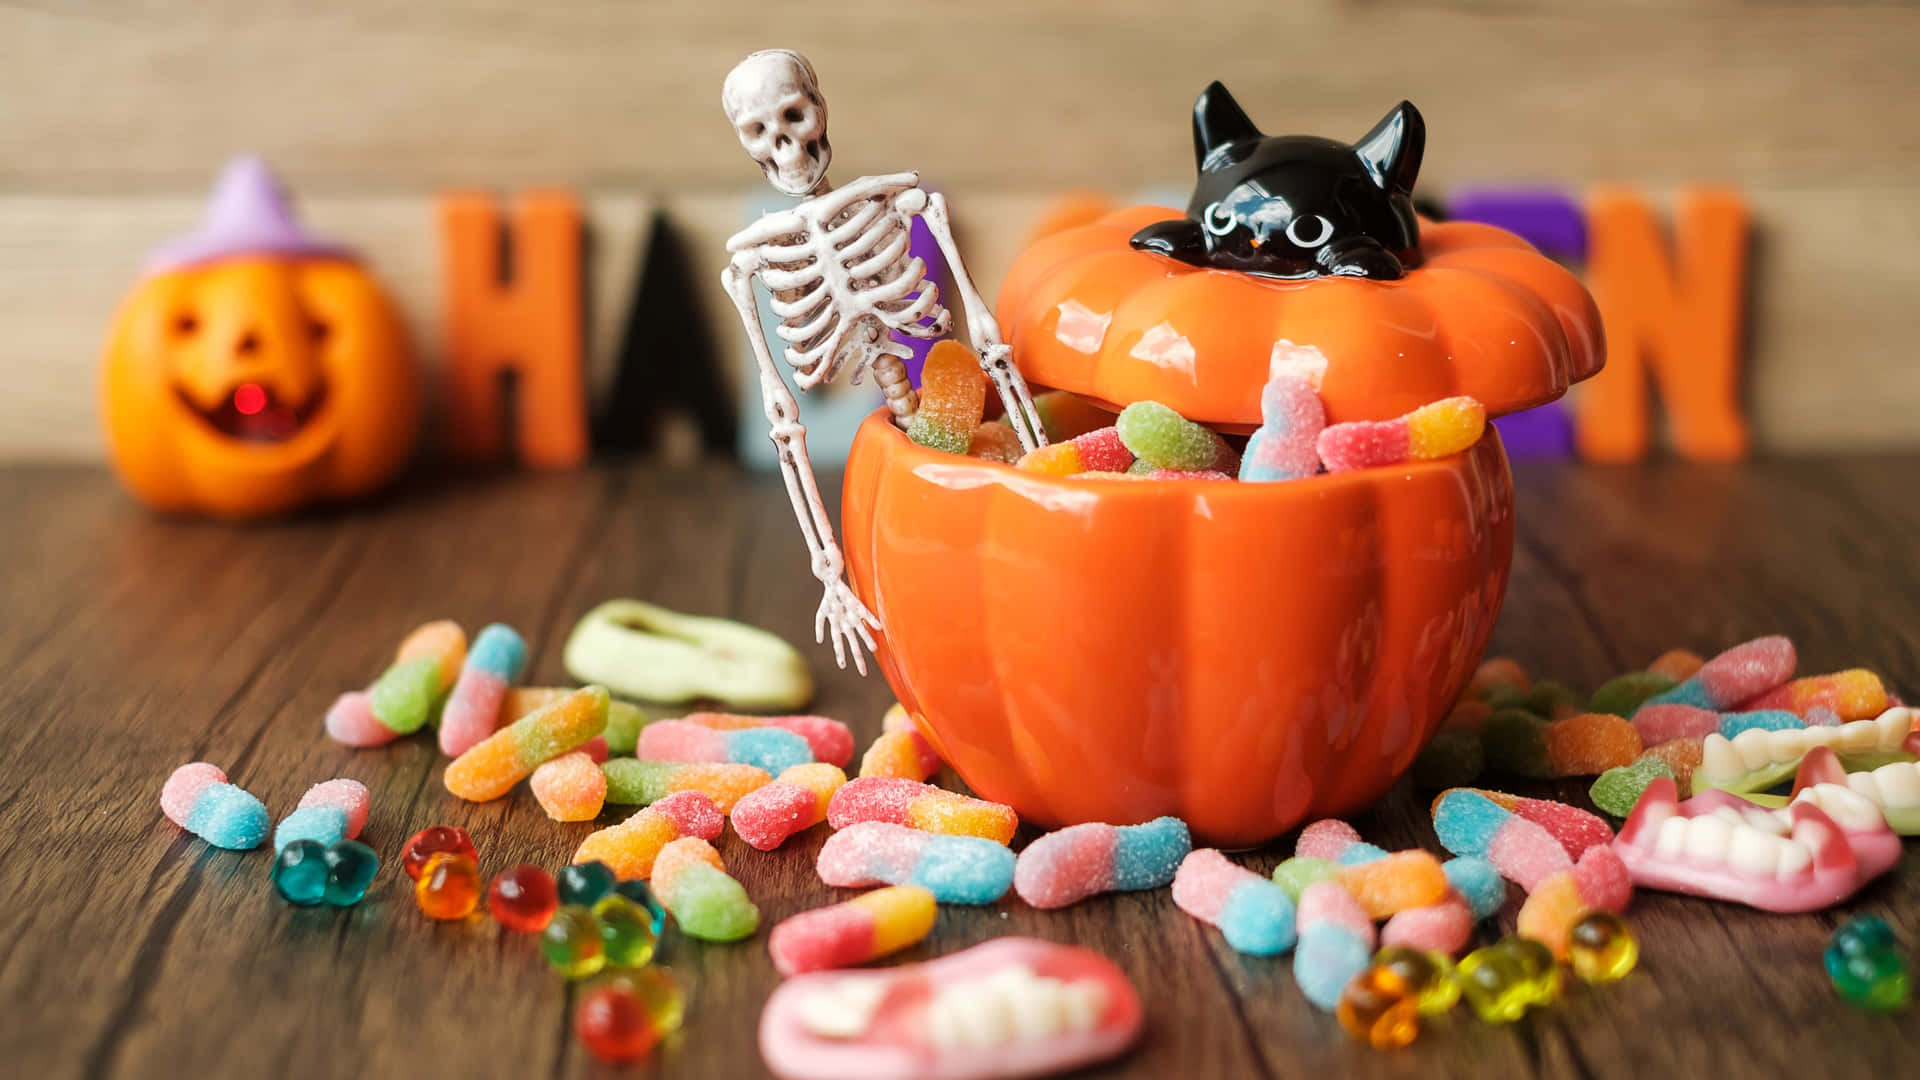 Get Ready for Trick-or-Treat with These Delicious Halloween Treats! Wallpaper